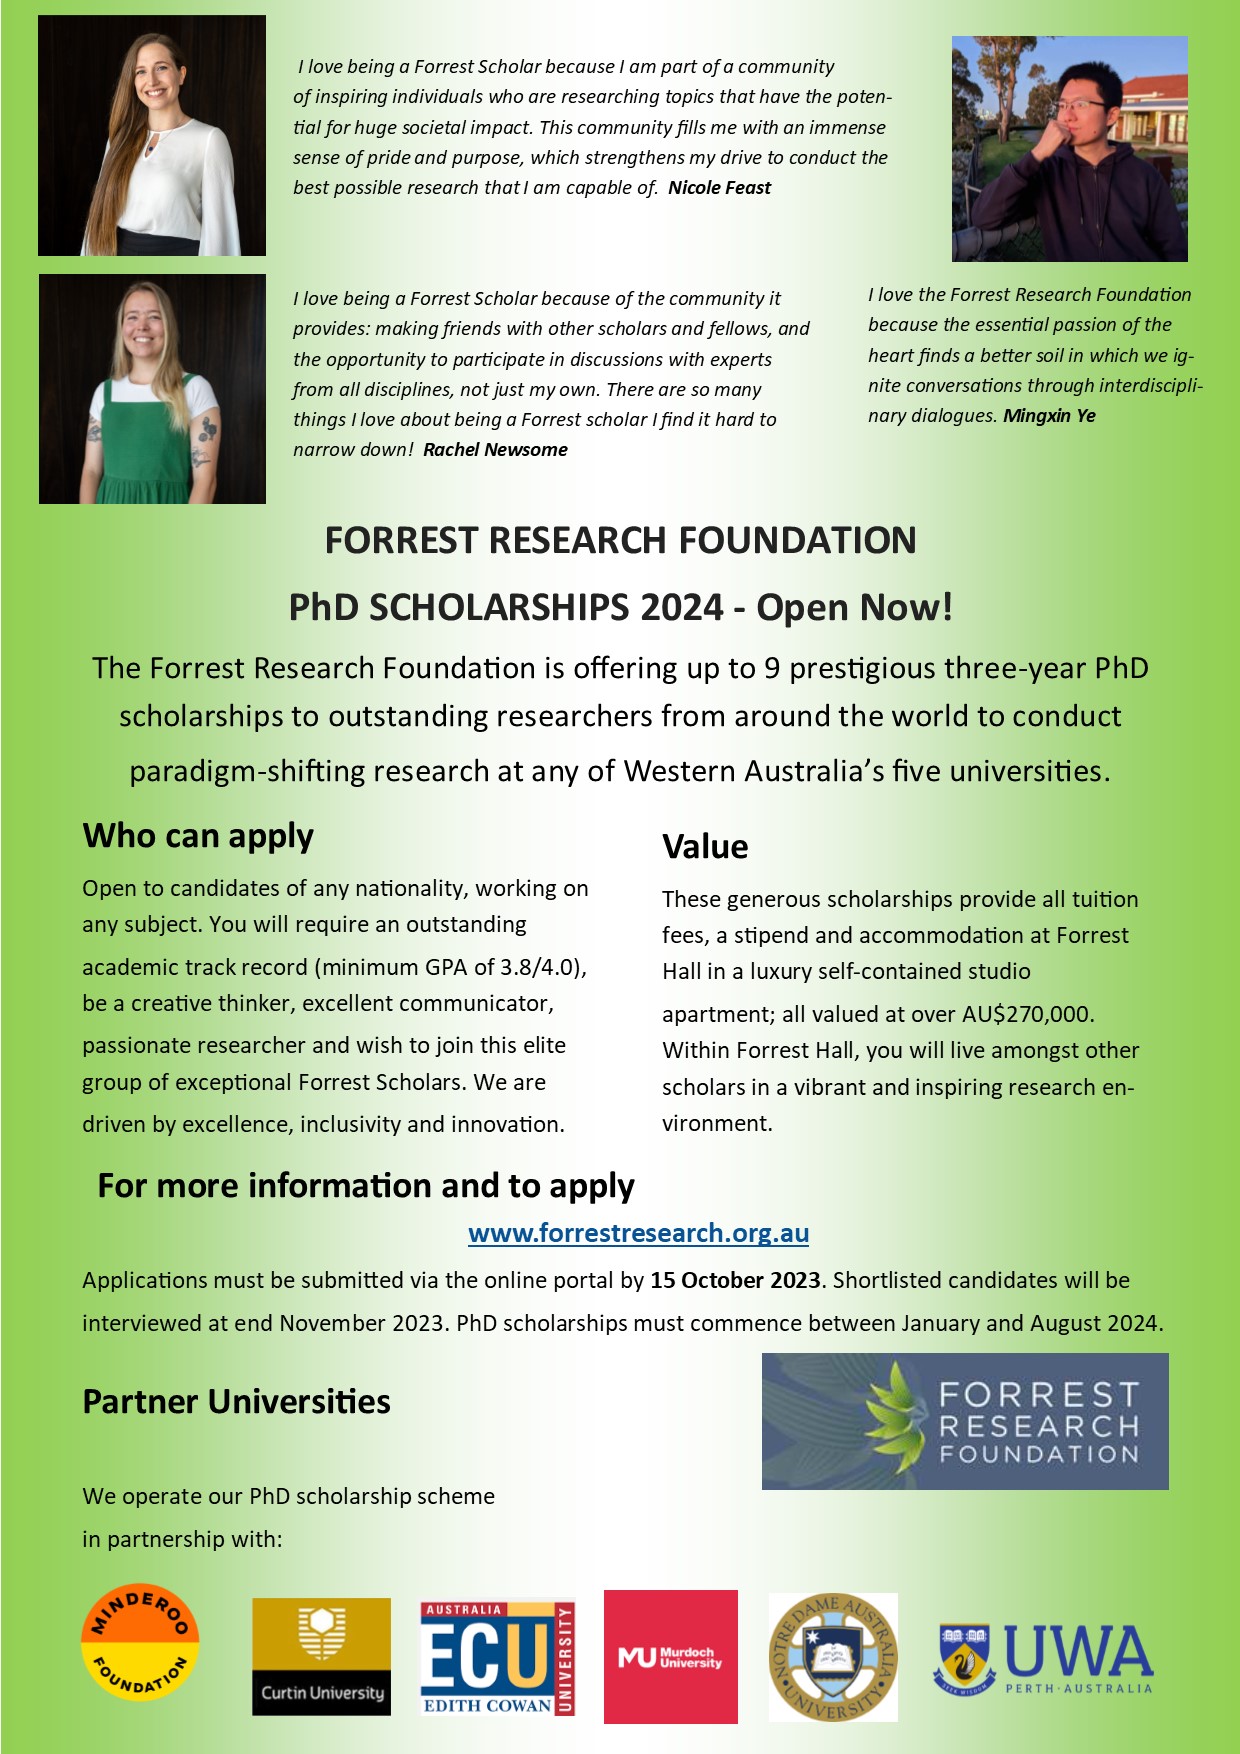 Forrest Research Foundation PhD Scholarships for 2024 – Now open!